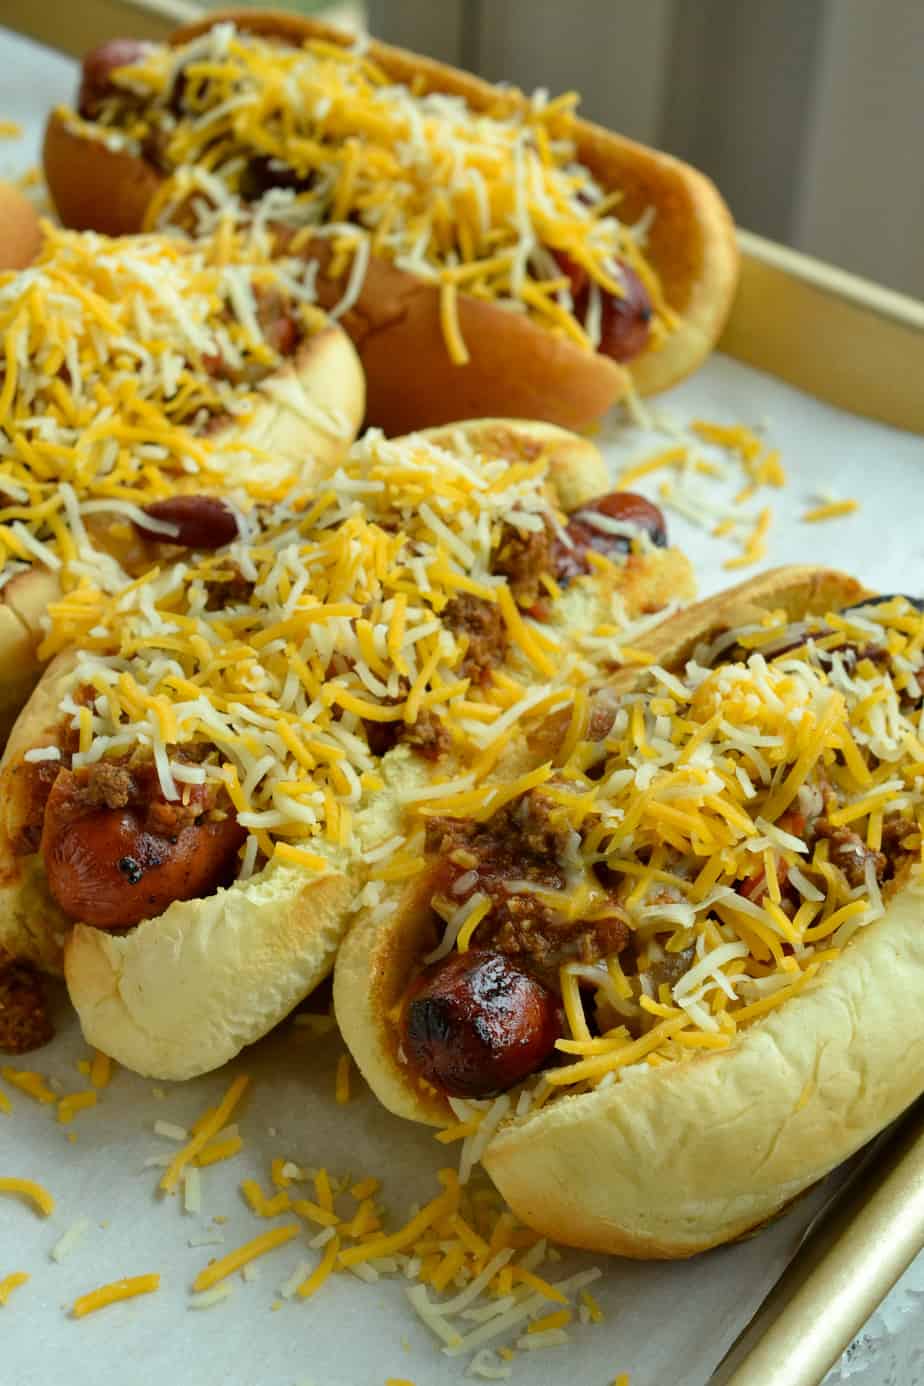 Chili Cheese Dogs for Game Day and Movie Night